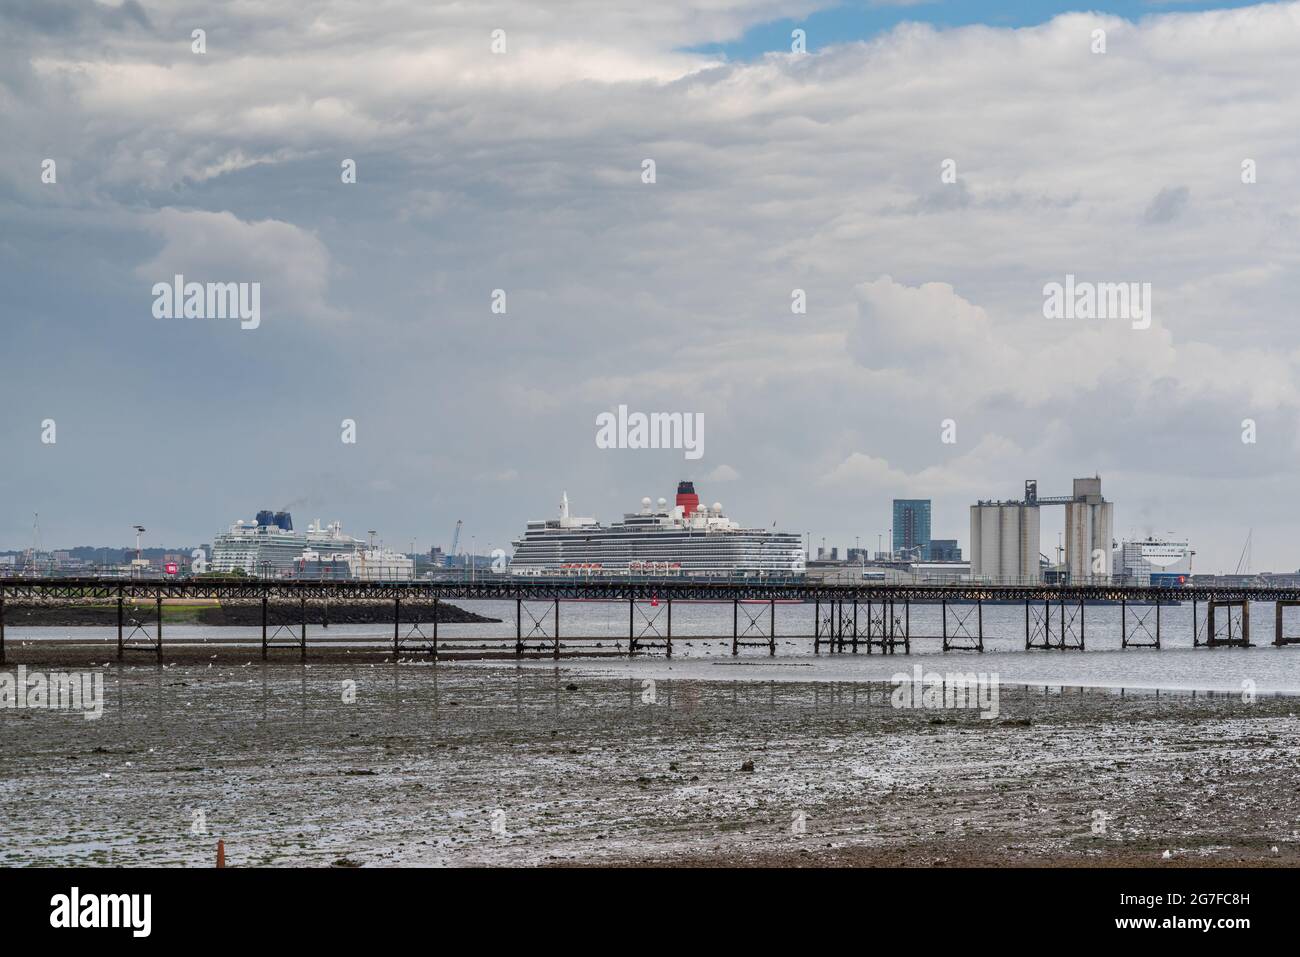 The Cunard Queen Elizabeth and Britannia cruise ships docked in the Port of Southampton, with Hythe Pier in the foreground, Southampton, England, UK Stock Photo